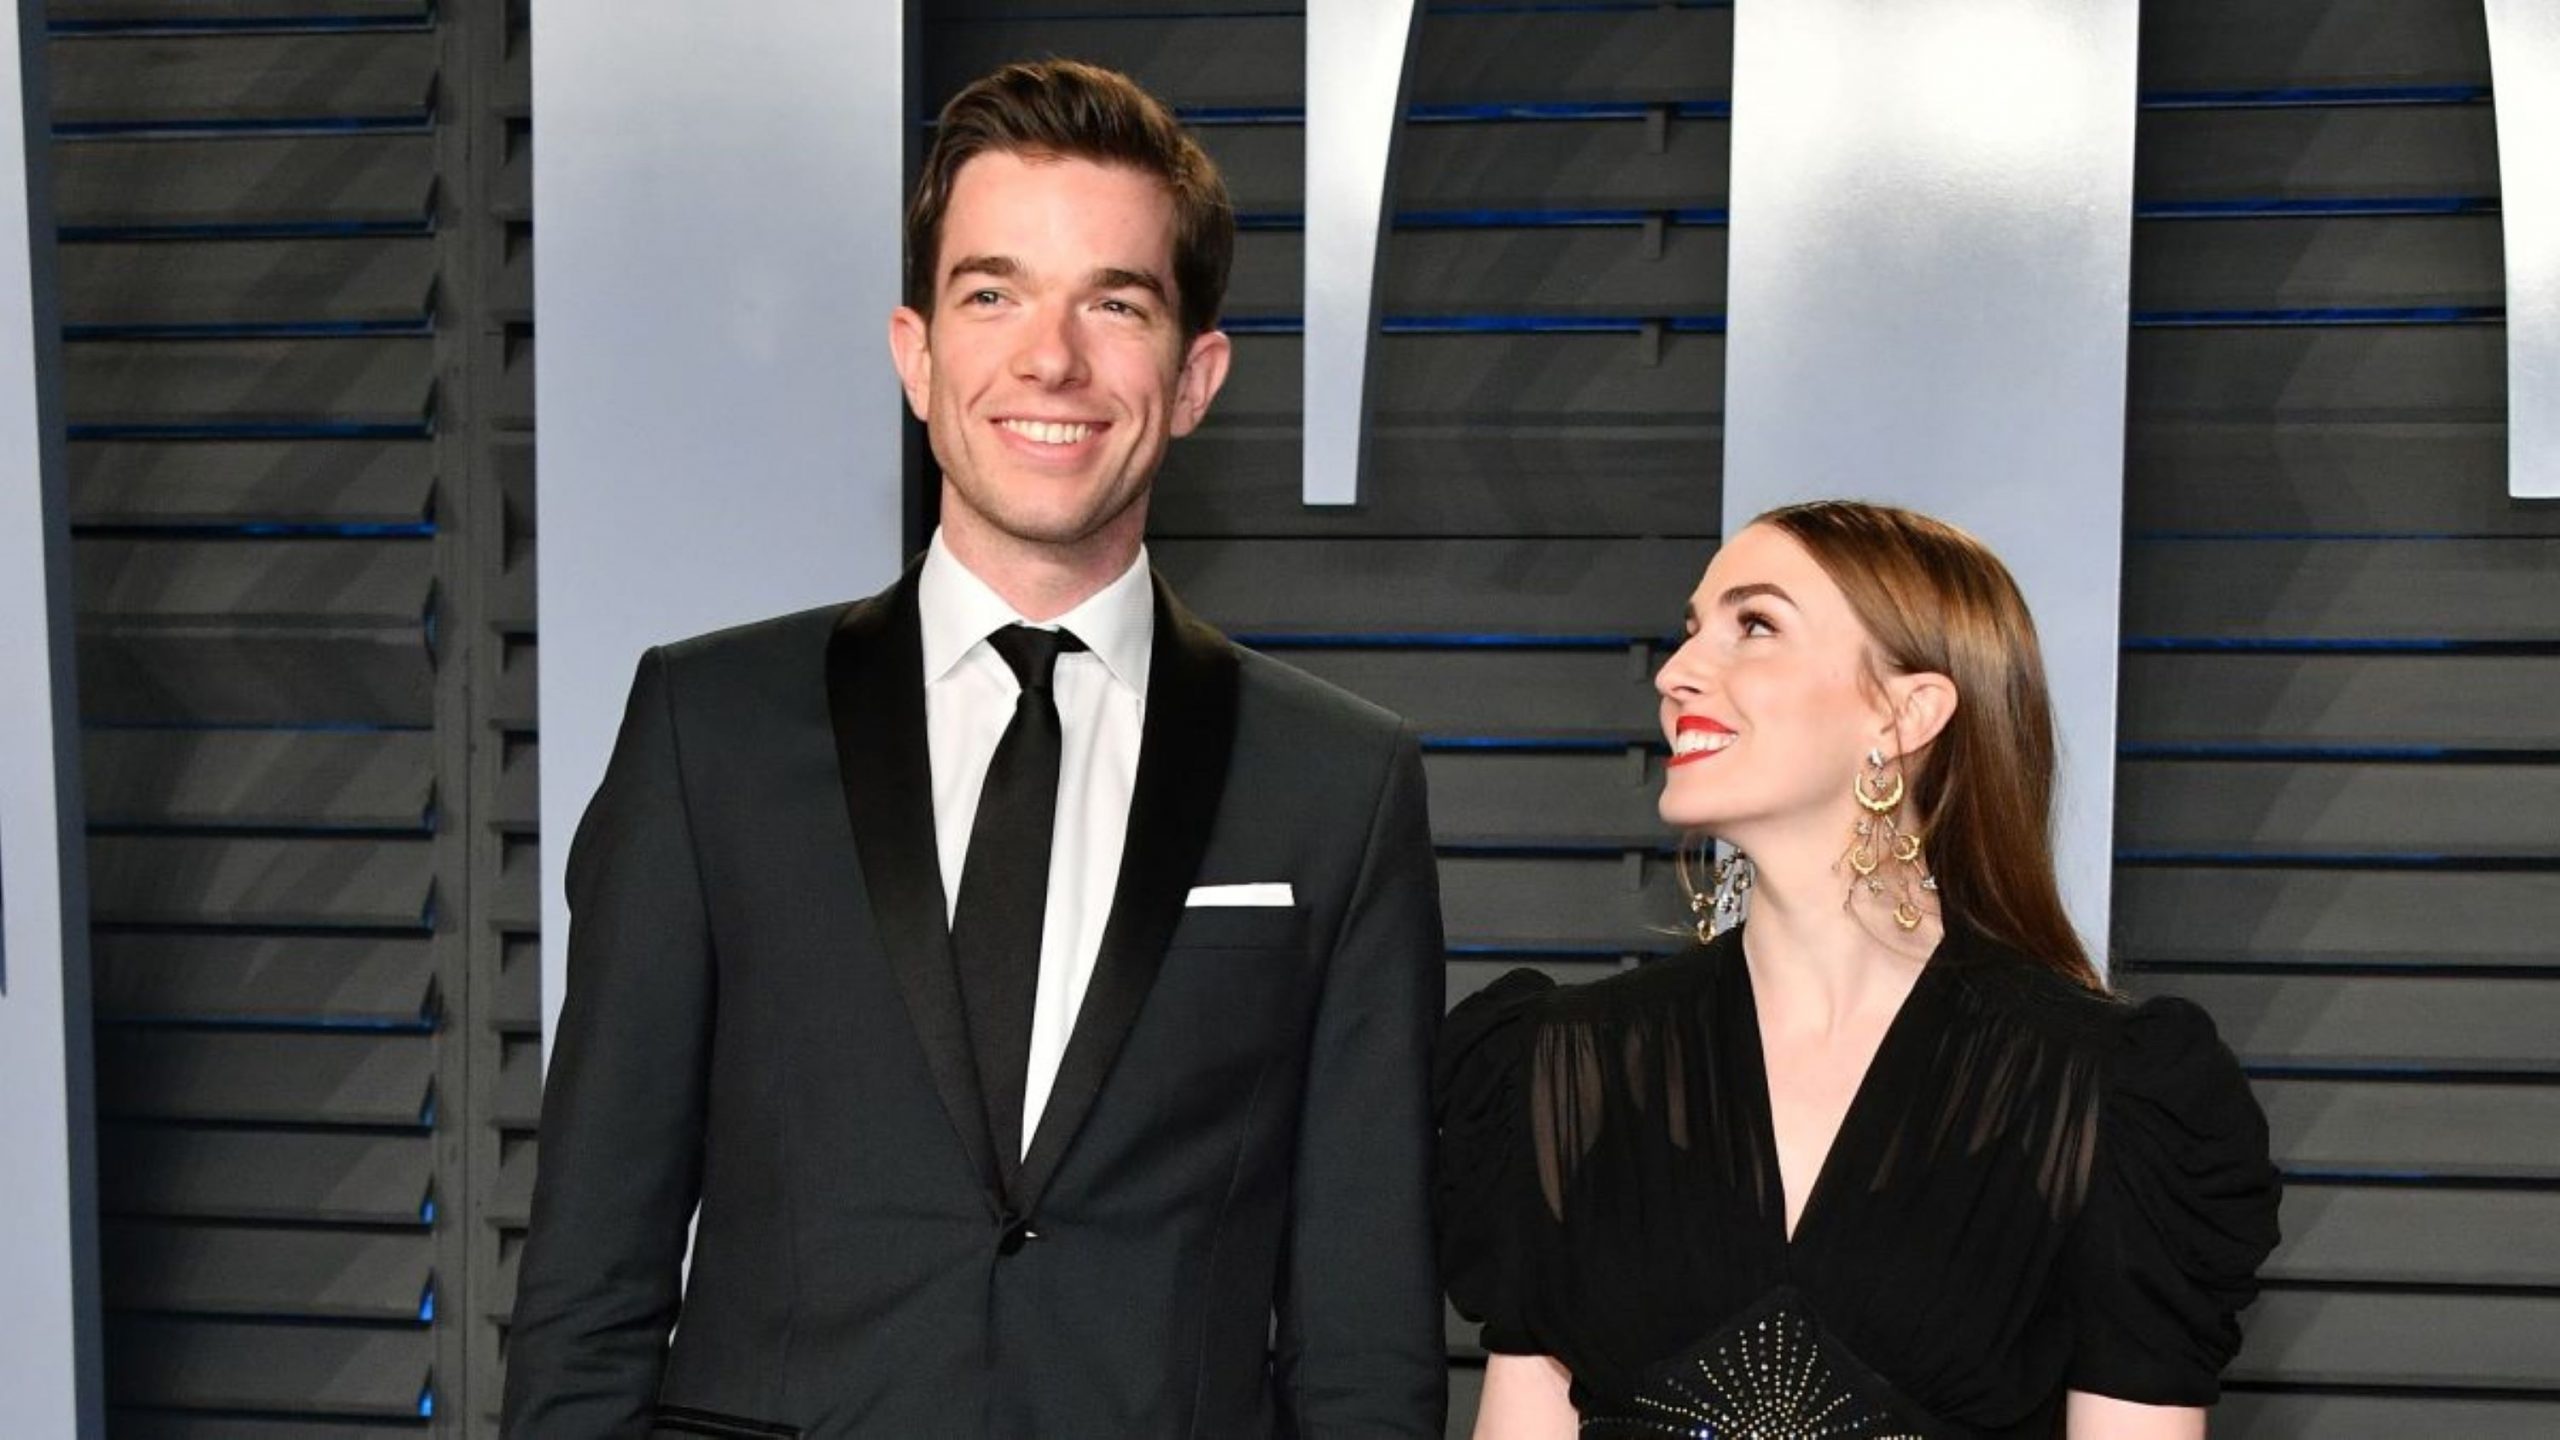 John Mulaney in black suit smiling, and Anna Marie Tendler smiling up at him